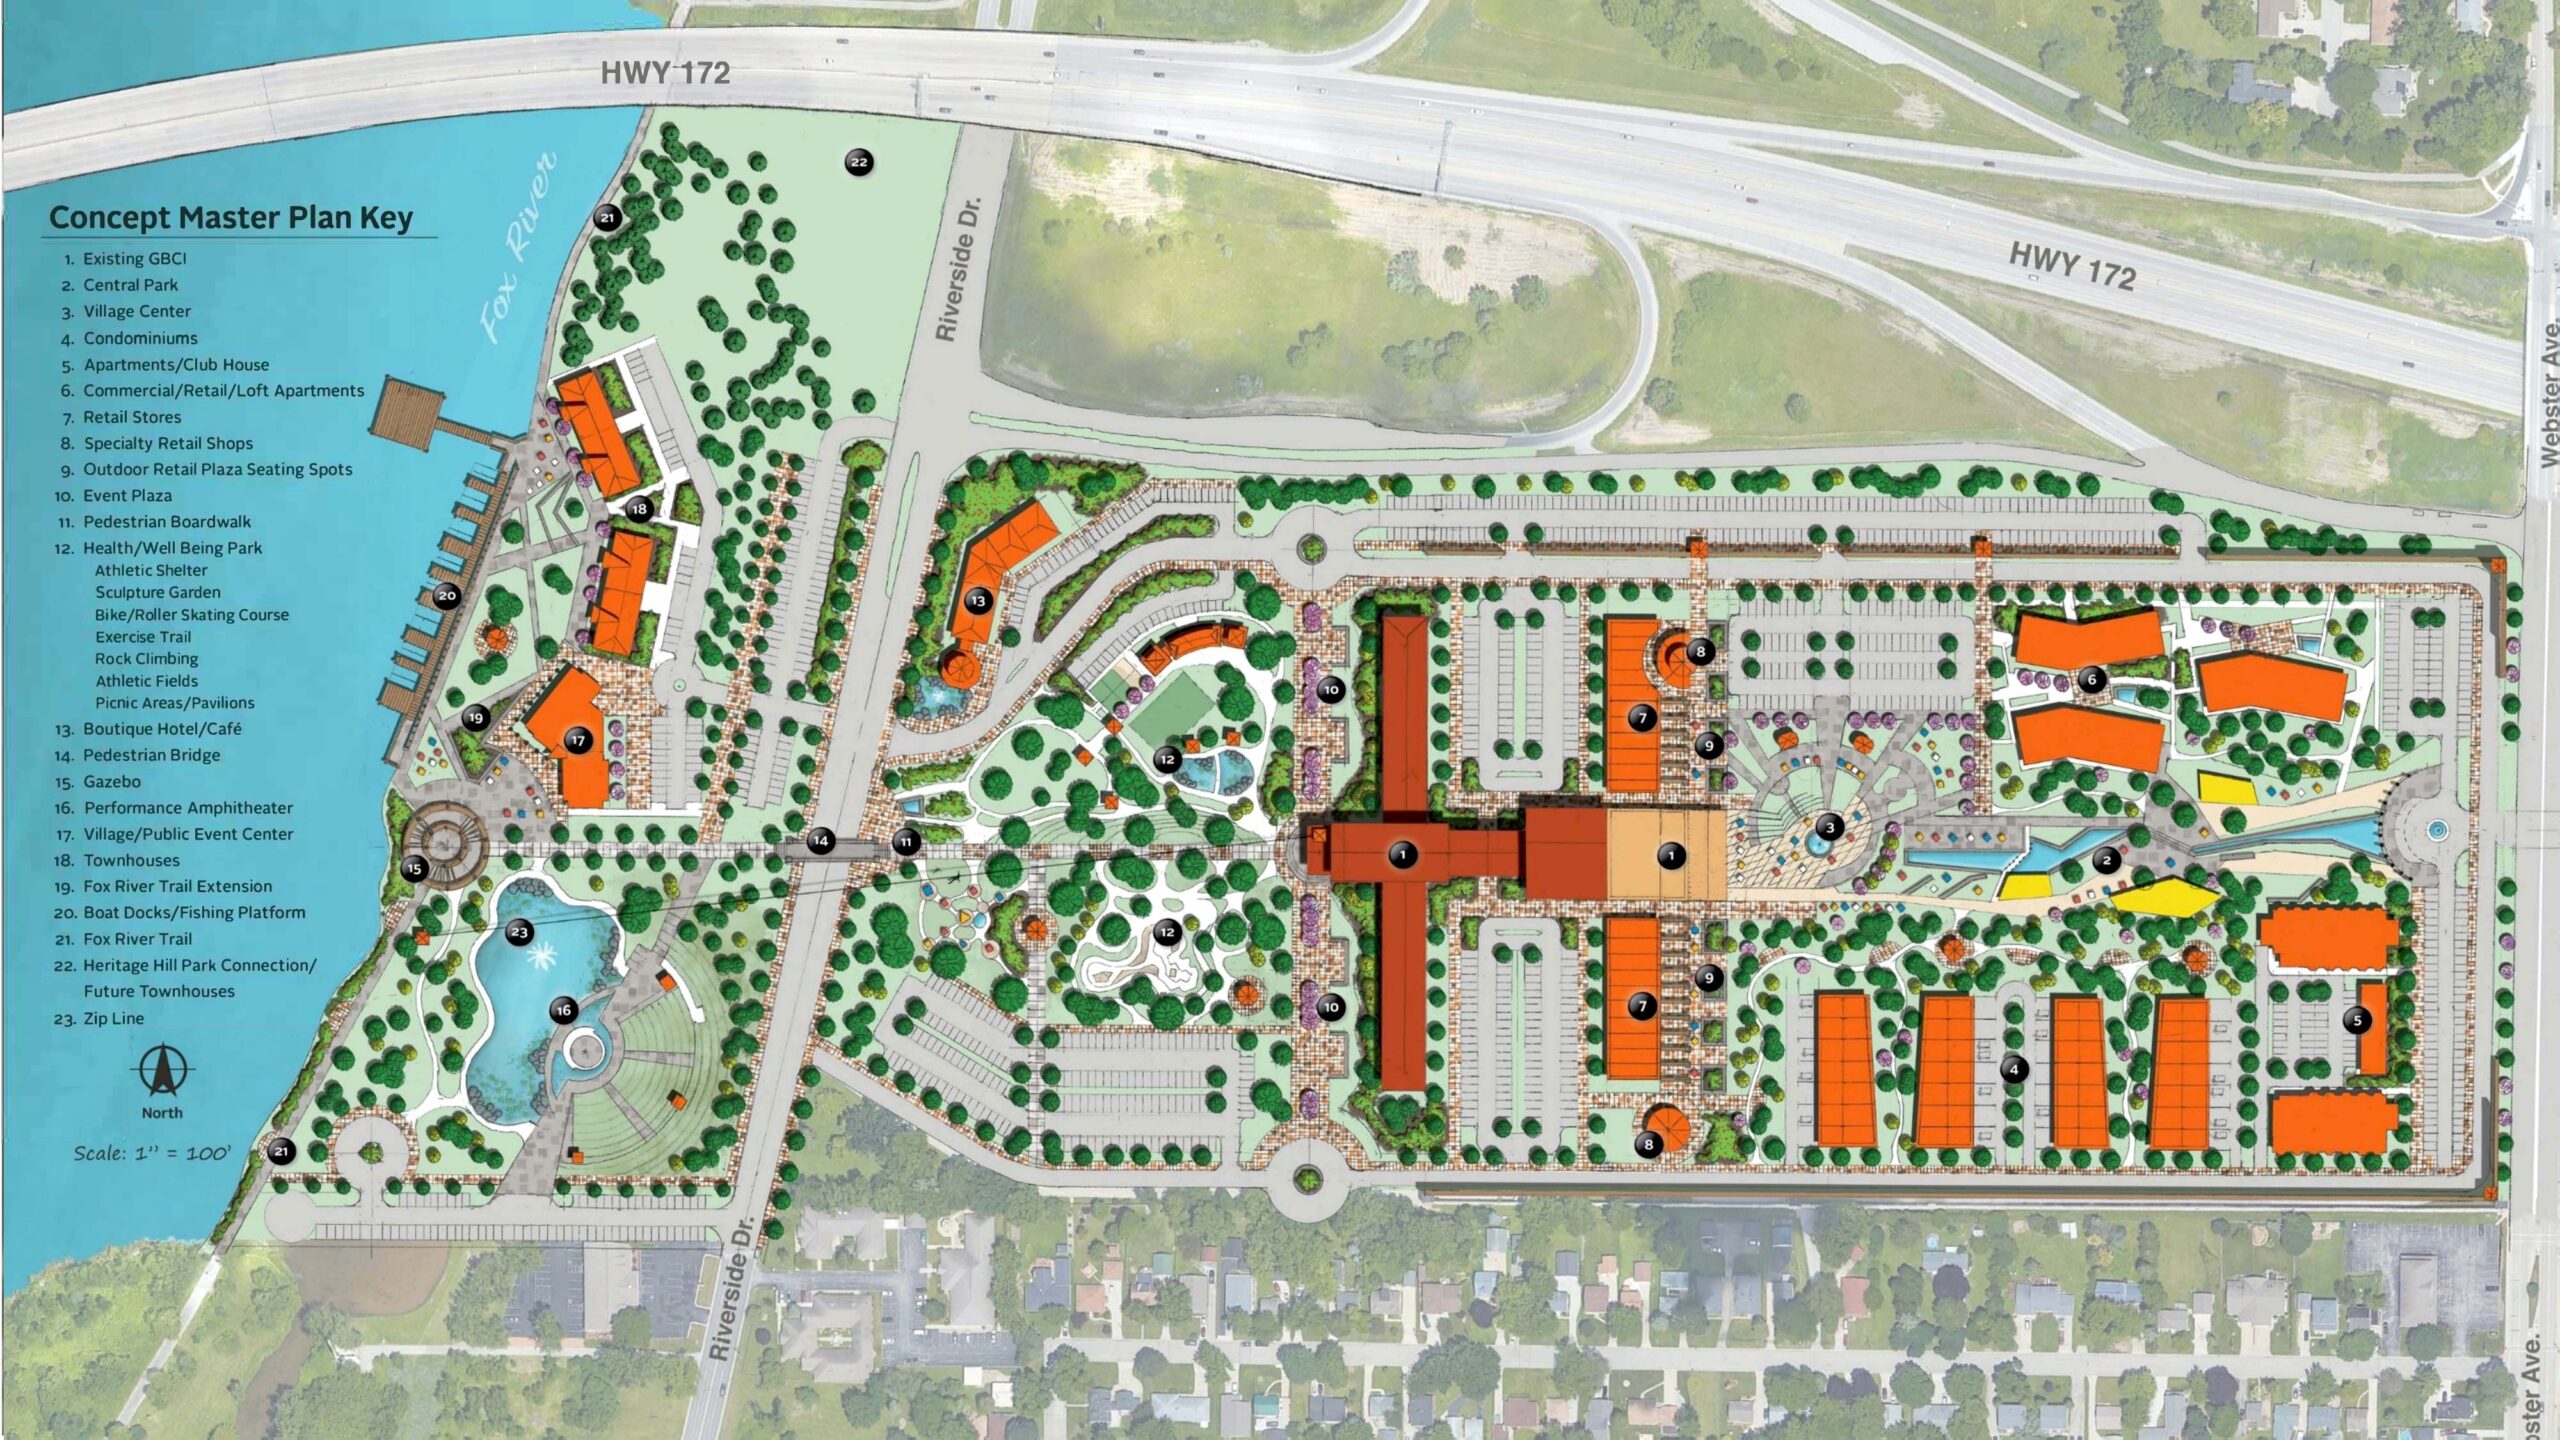 Site redevelopment concept proposal for the Green Bay Correctional Institute